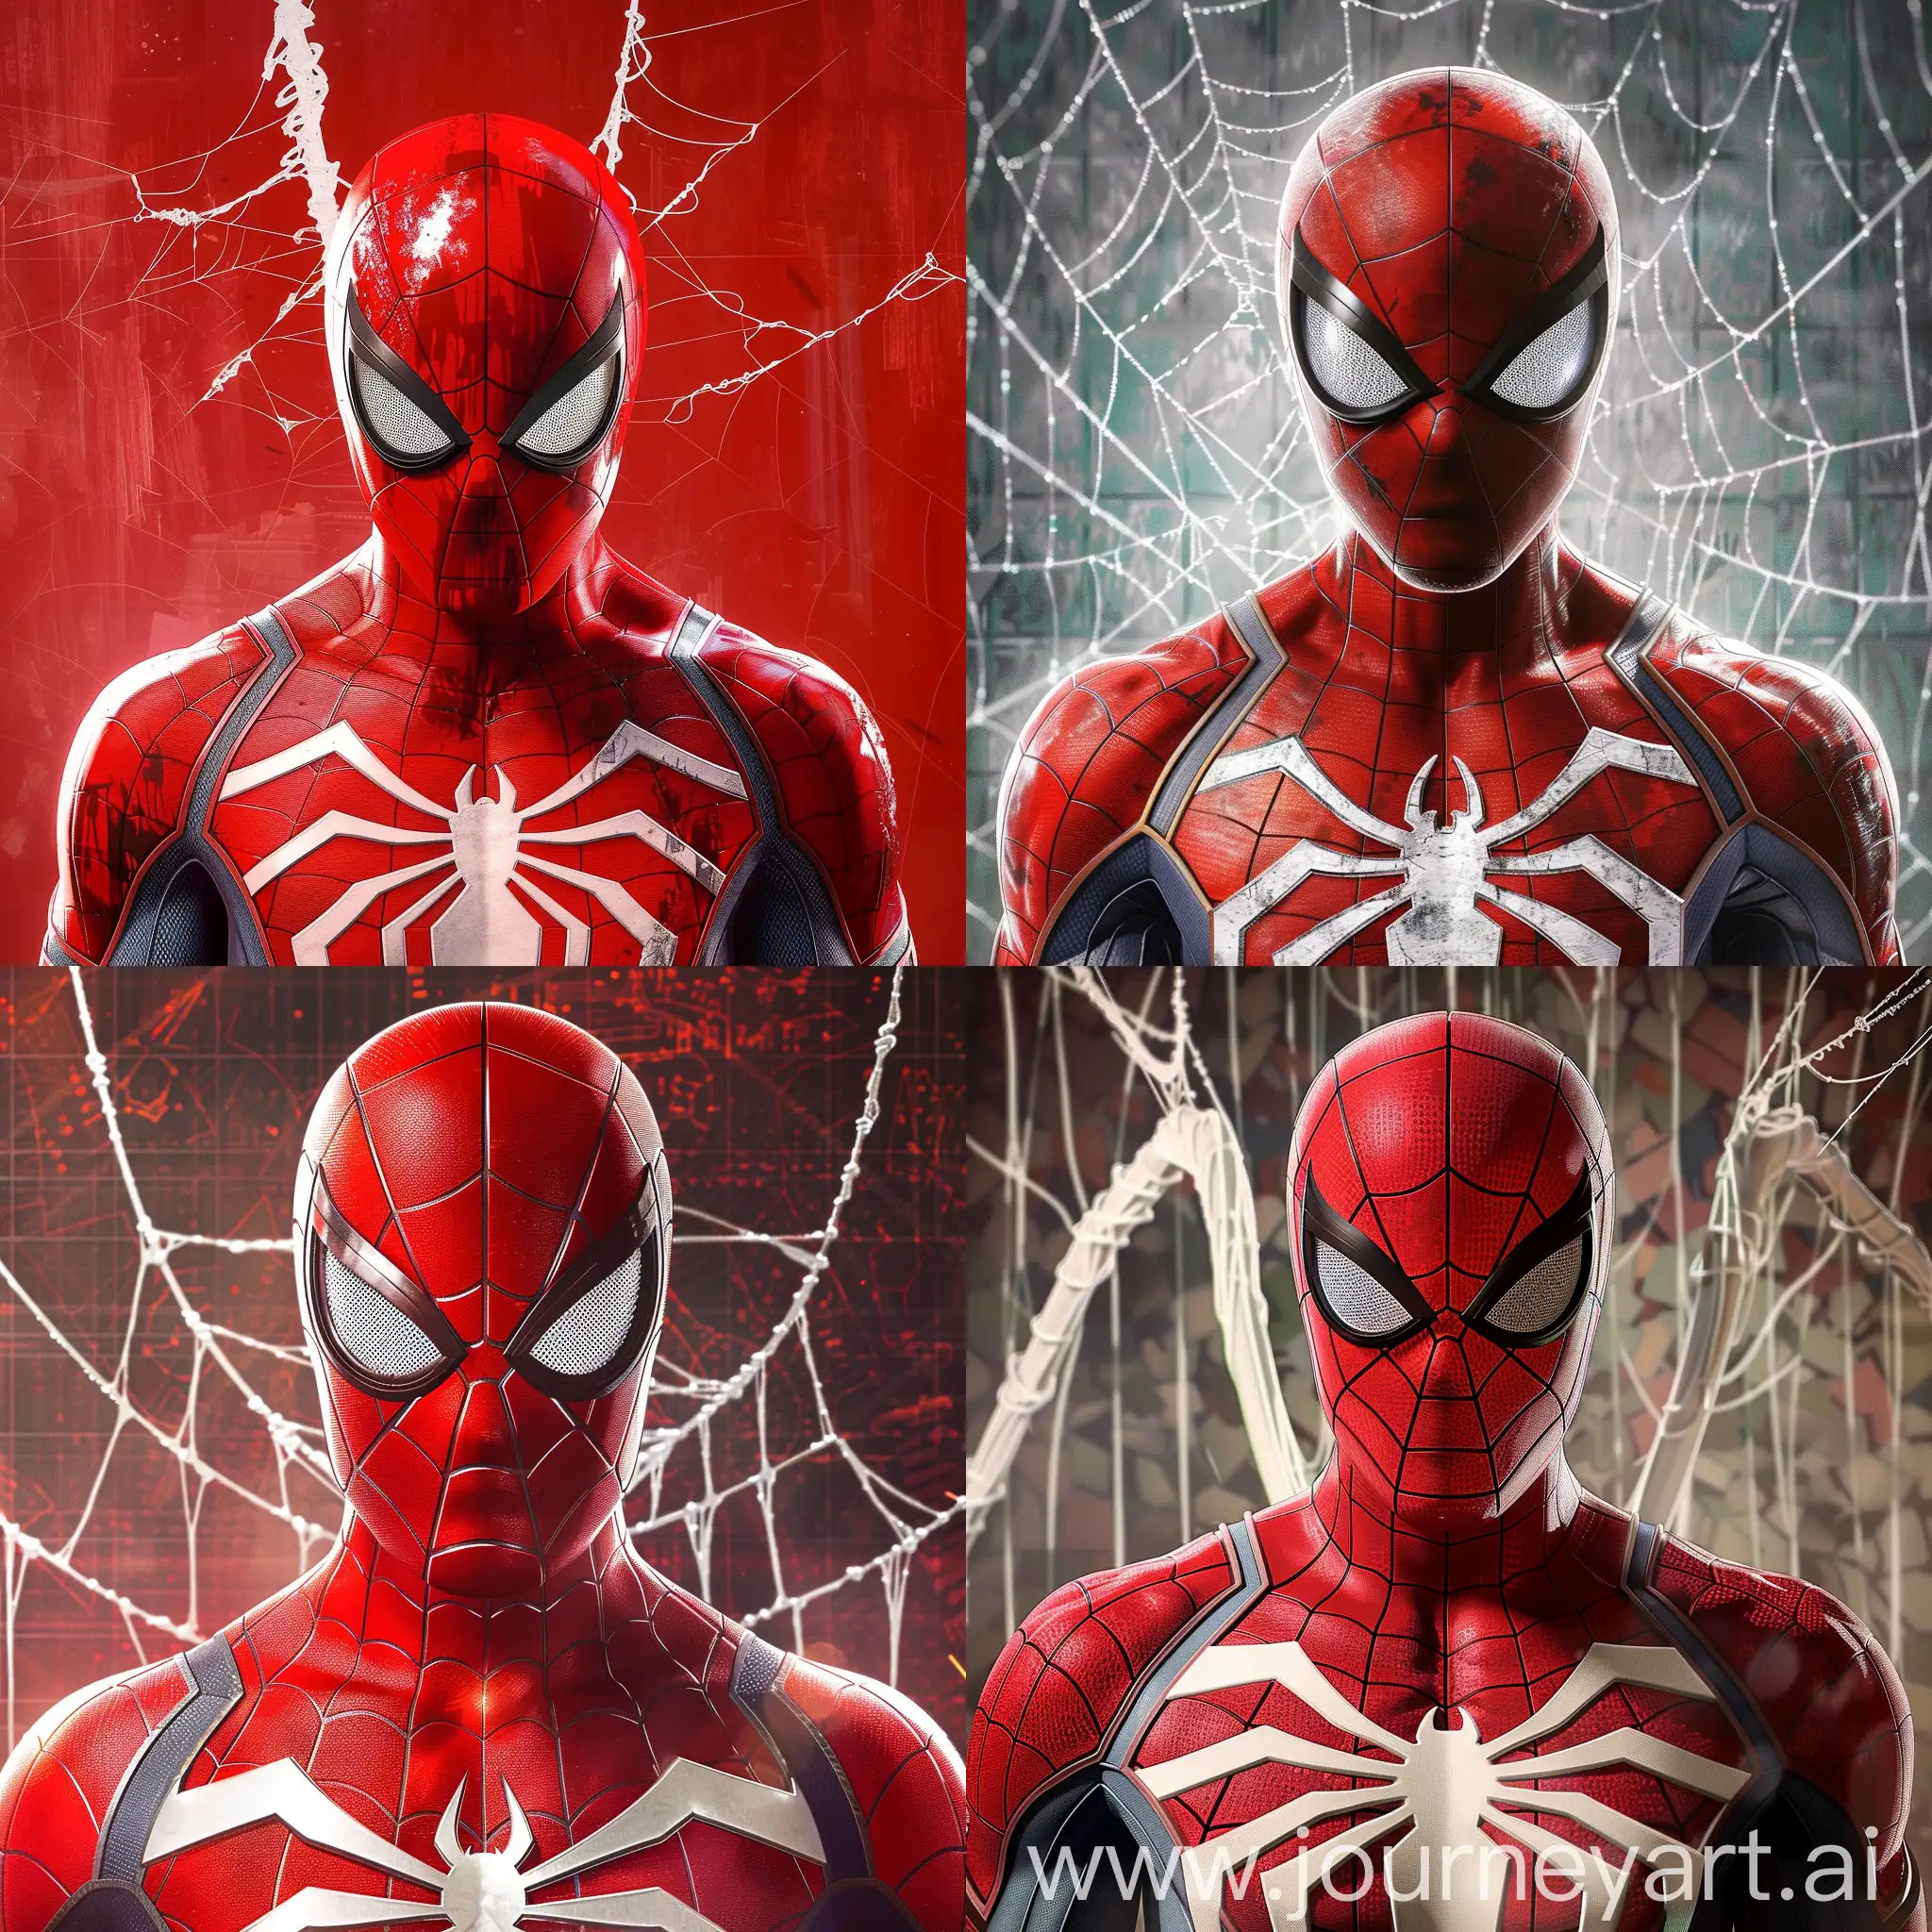 SpiderMan-Advanced-Suit-with-White-Long-Spider-Symbol